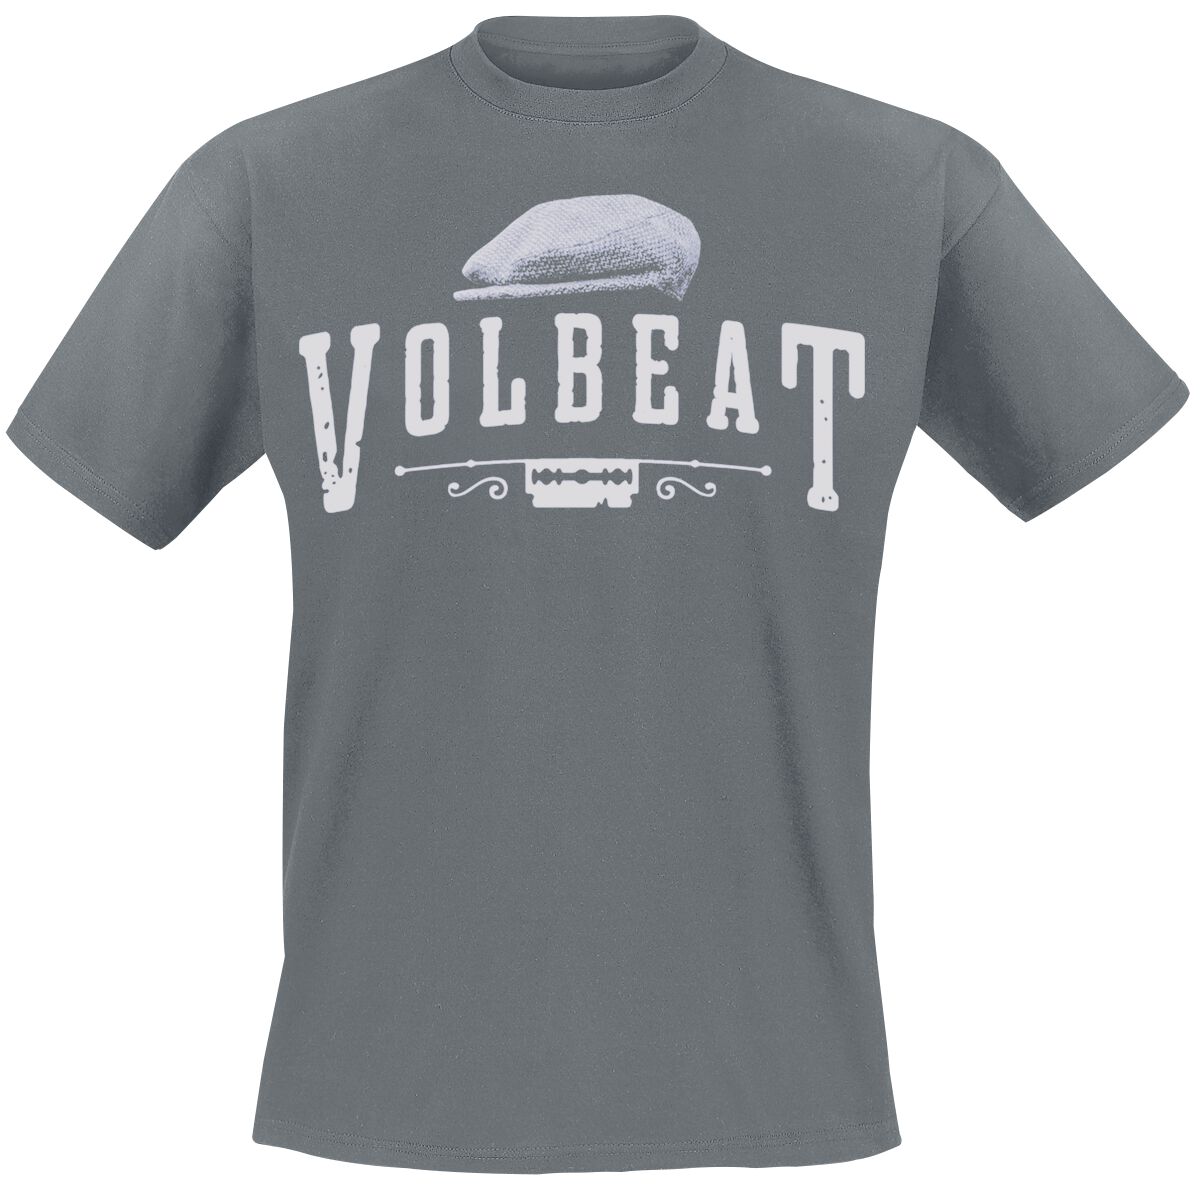 Volbeat Sixpence - Rewind, Replay, Rebound T-Shirt charcoal in M